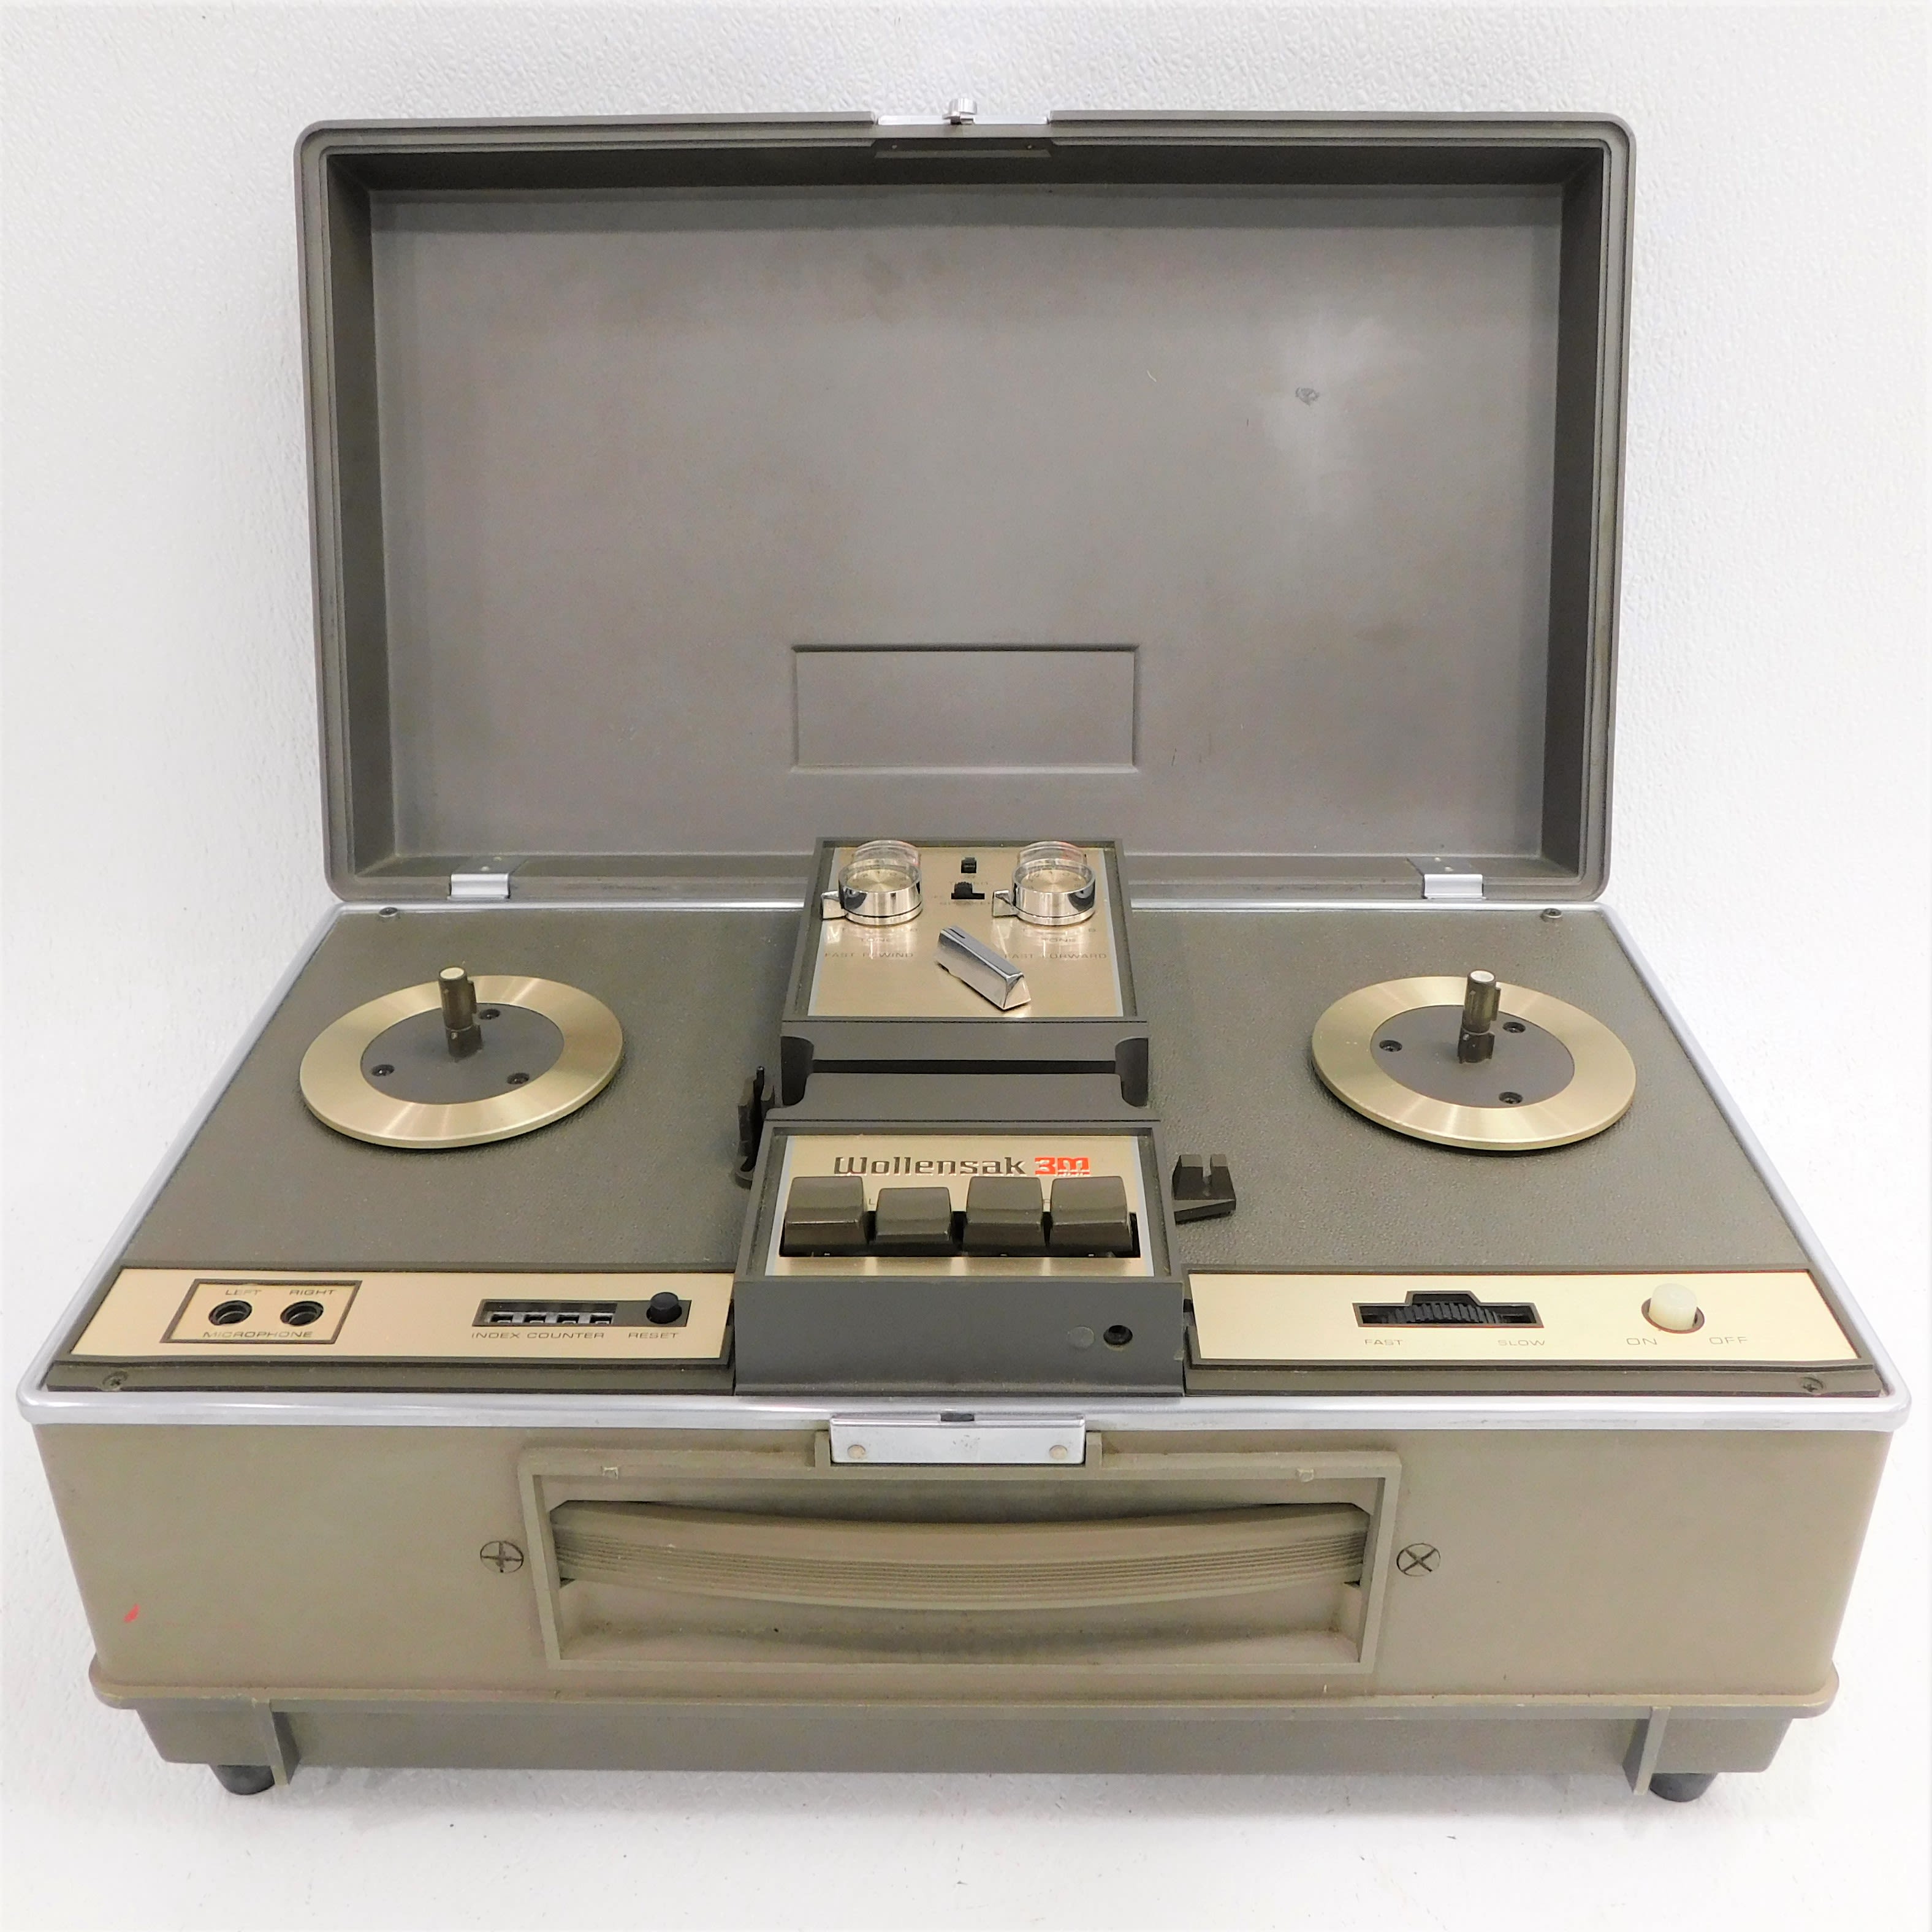 Wollensak 5750 Stereophonic Tape Recorder Manual